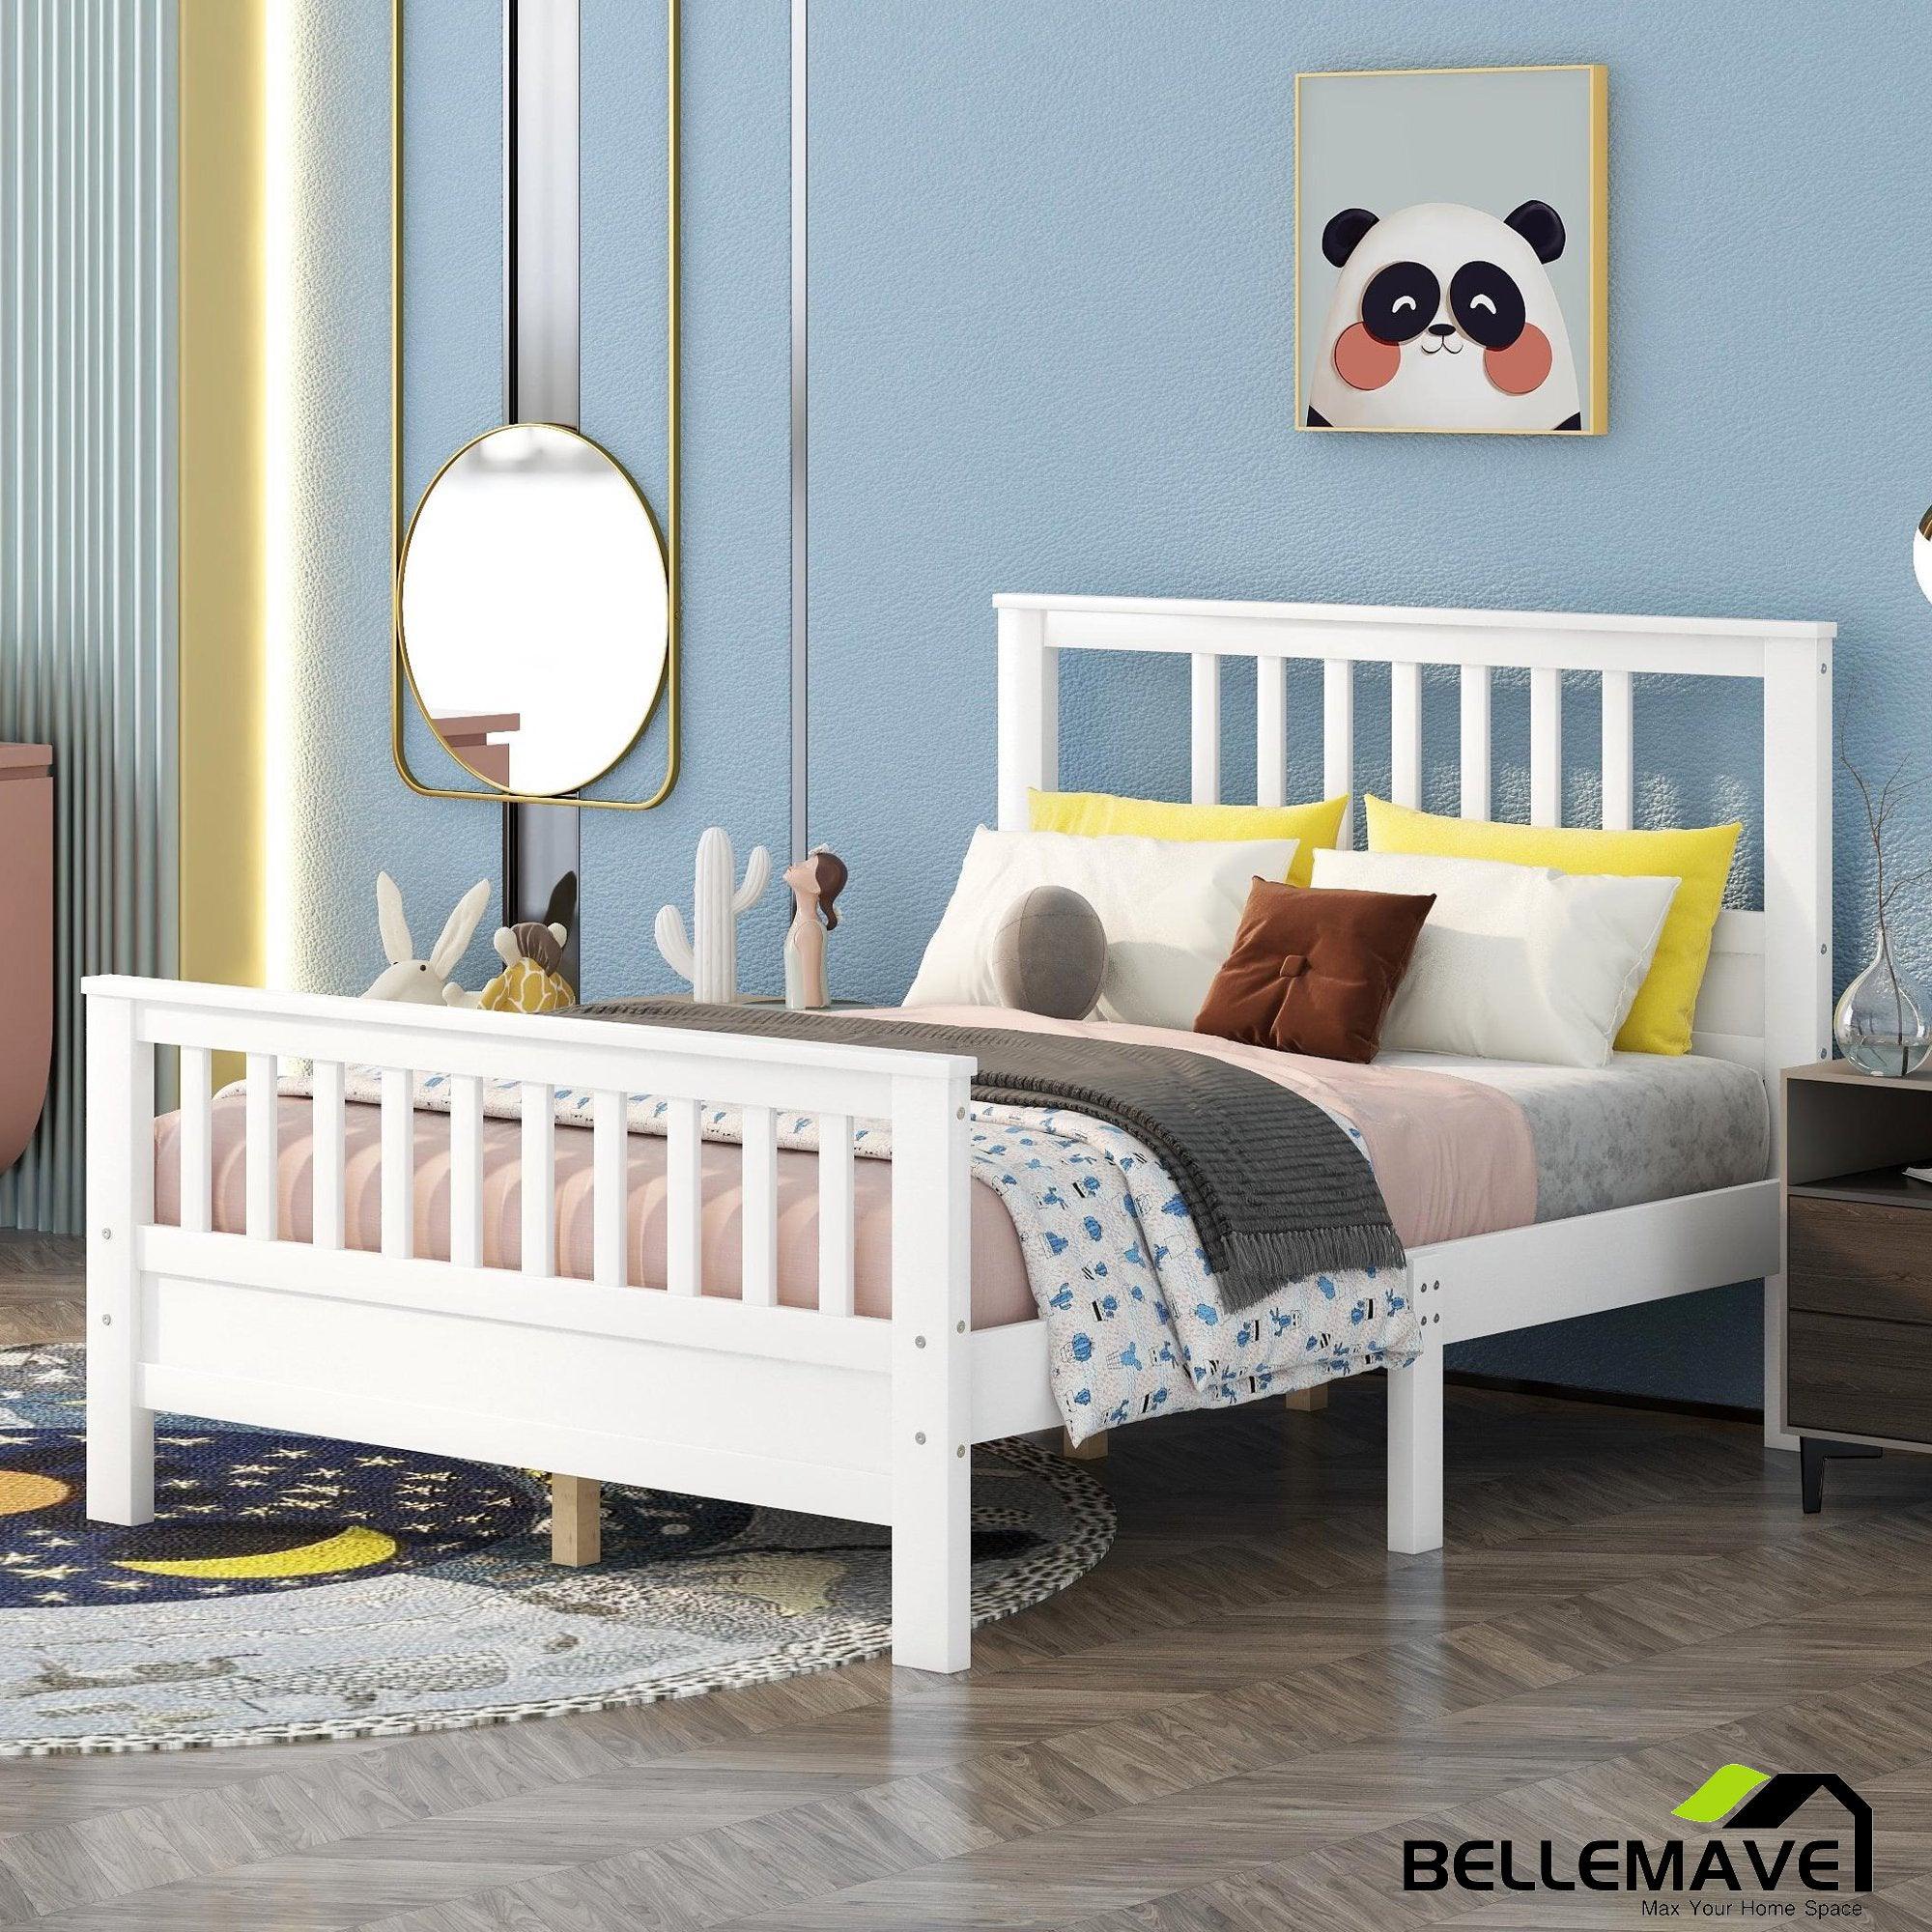 Bellemave Wood Platform Bed with Headboard and Footboard（Adequate stock） - Bellemave